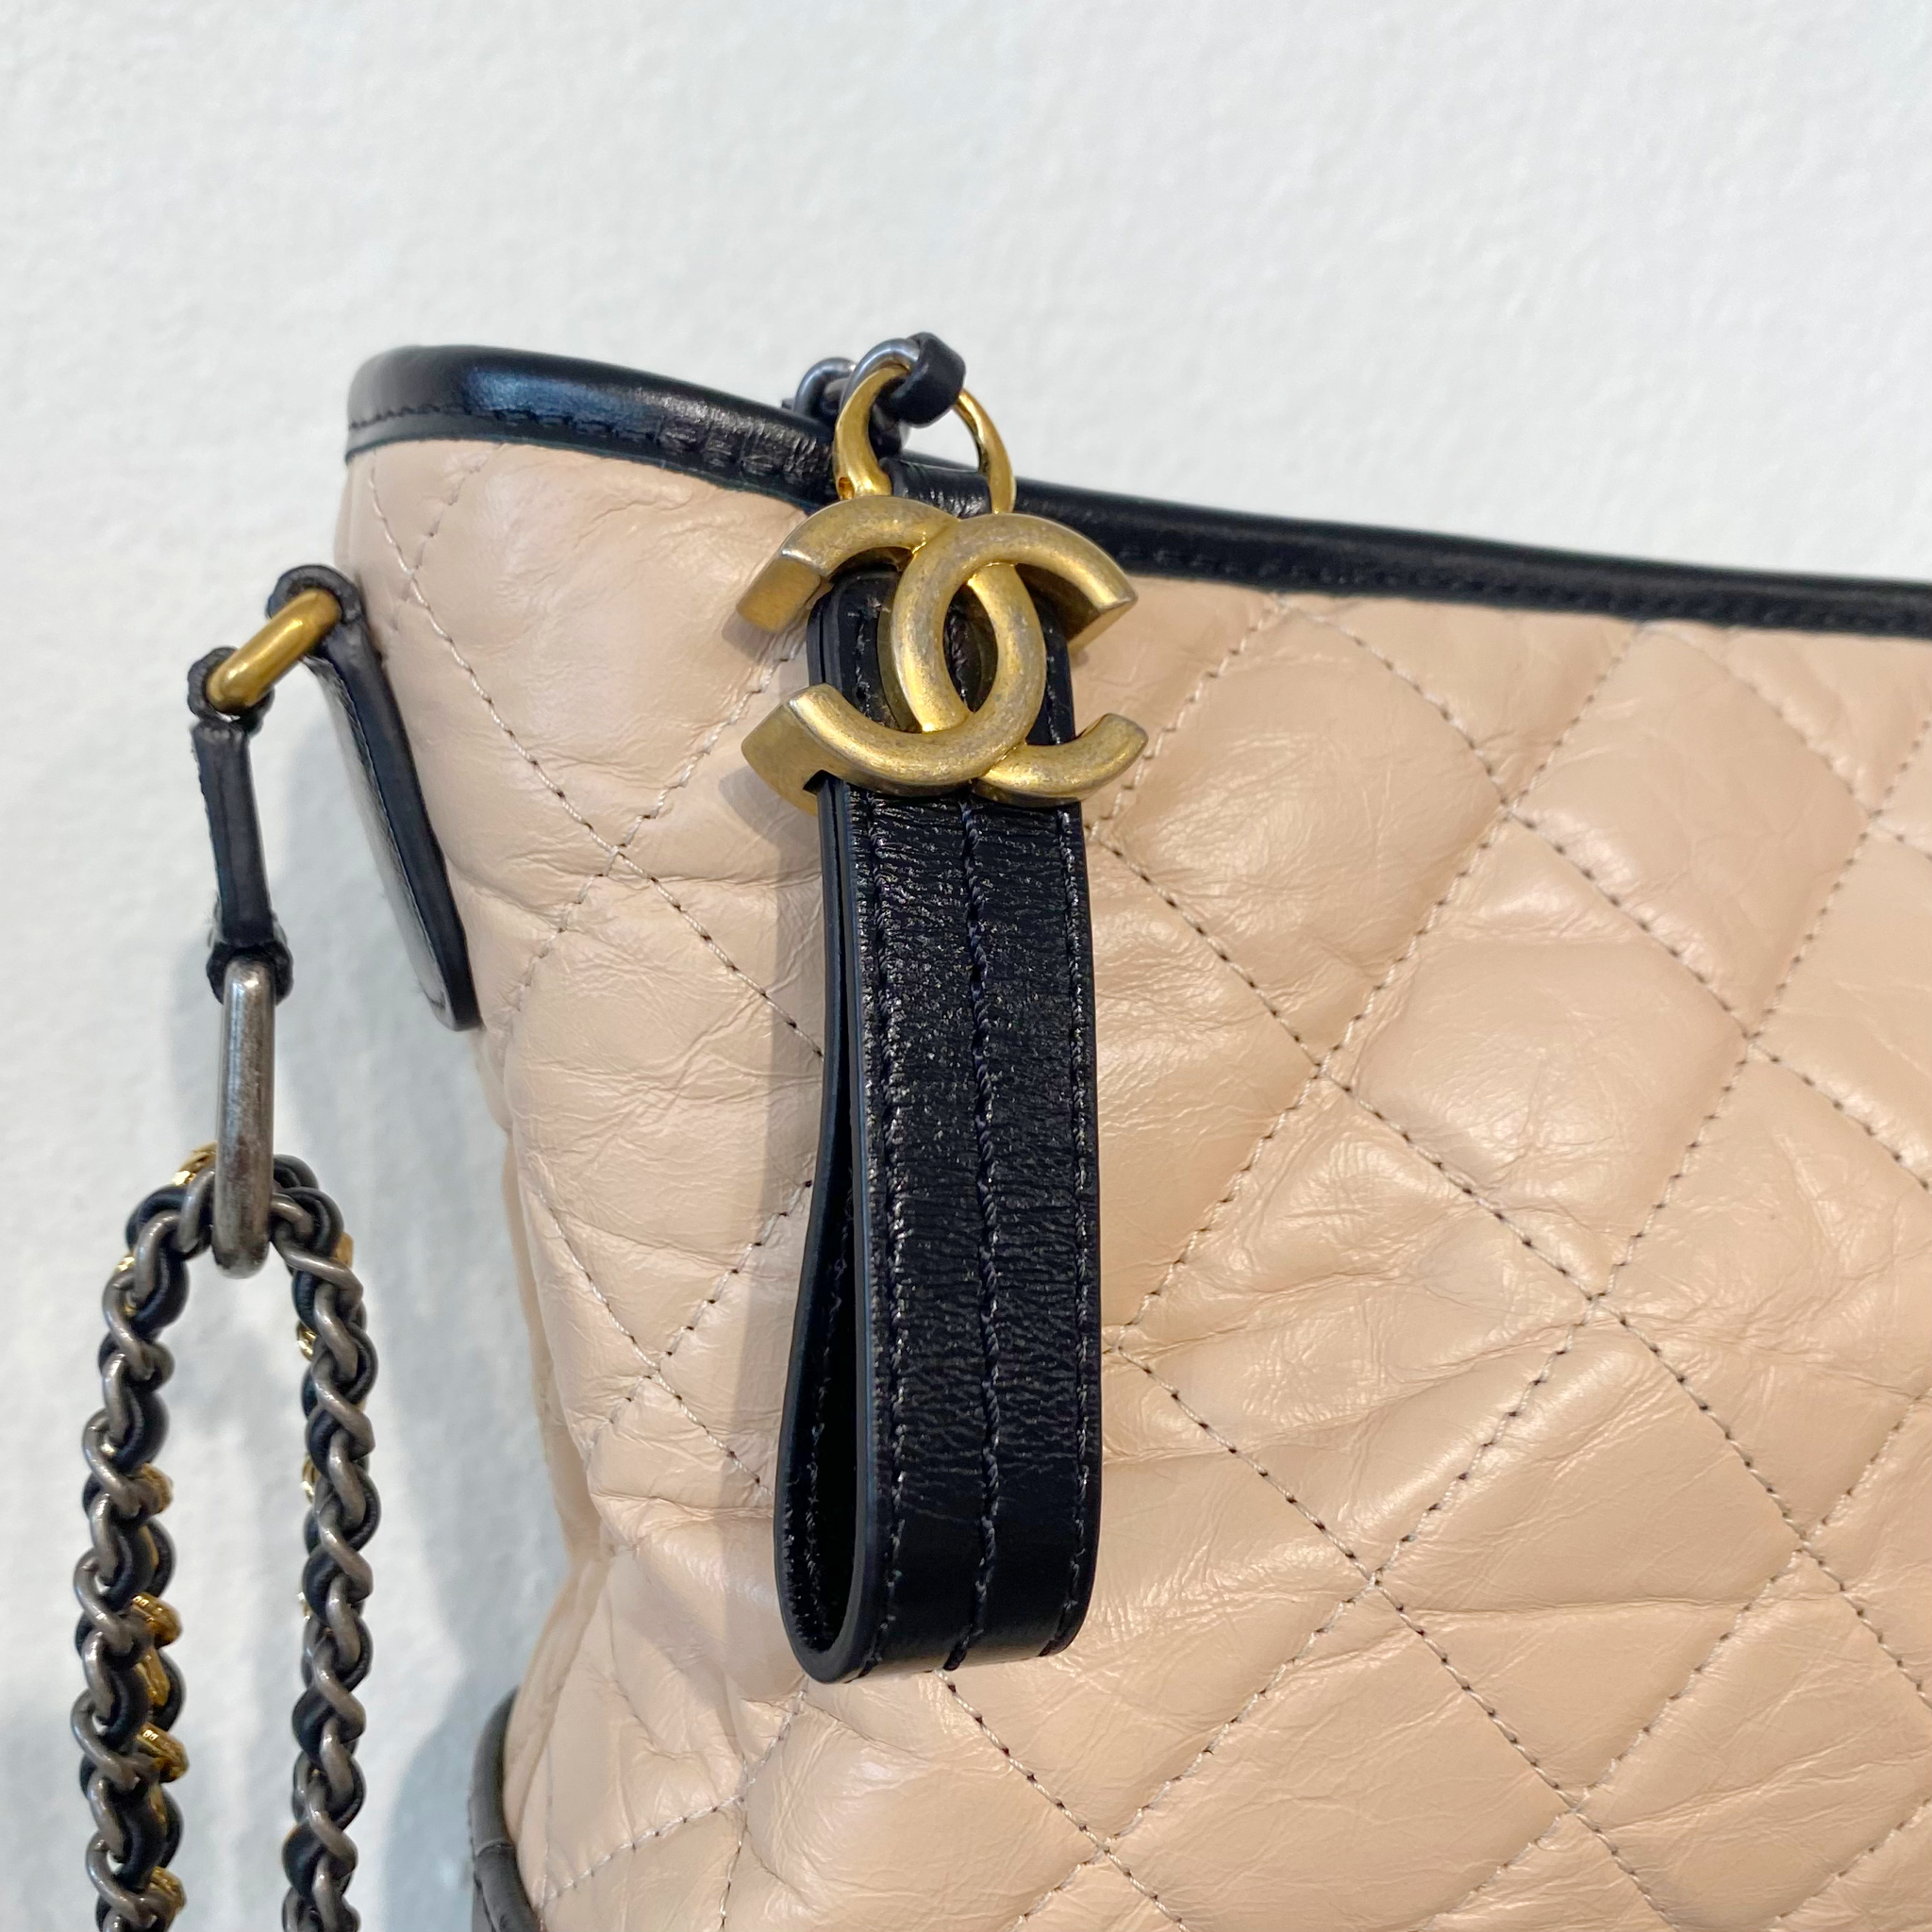 Foxy Couture - Our Black and Beige Chanel Gabrielle Bag